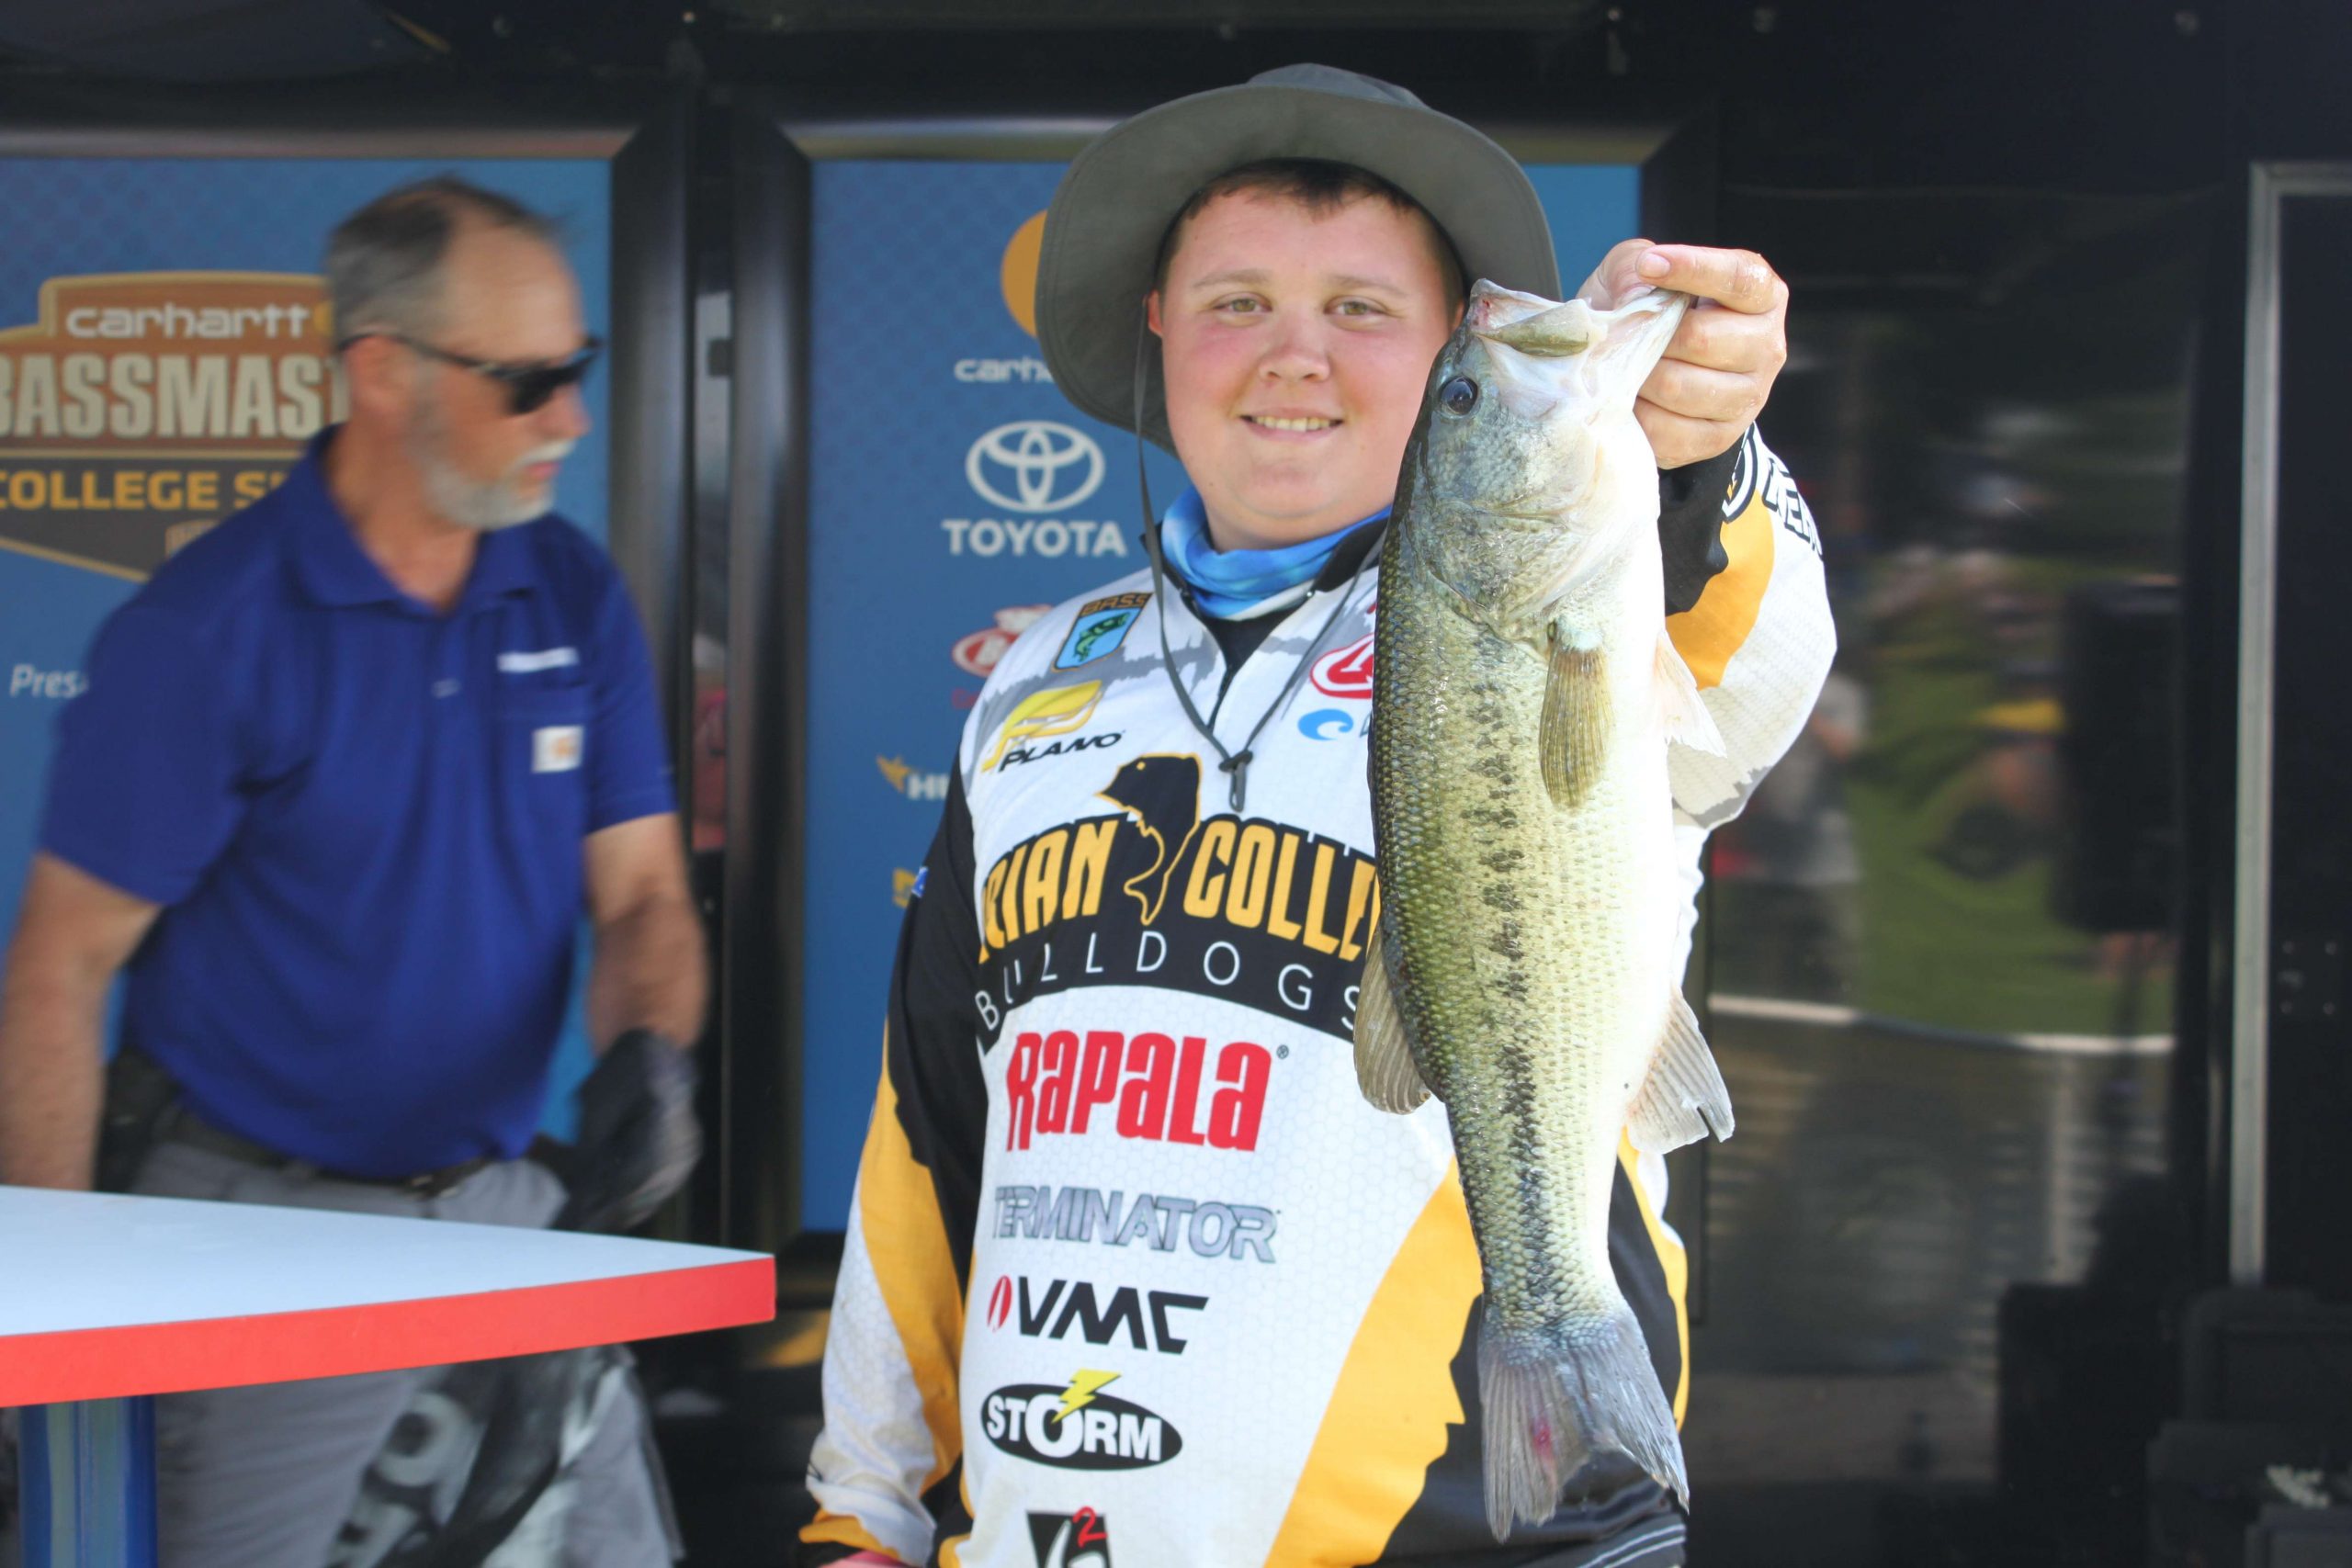 Blake Johnson of Adrian College caught the first 4-pounder of the tournament. He weighed this bass that went 4-1 on Friday.